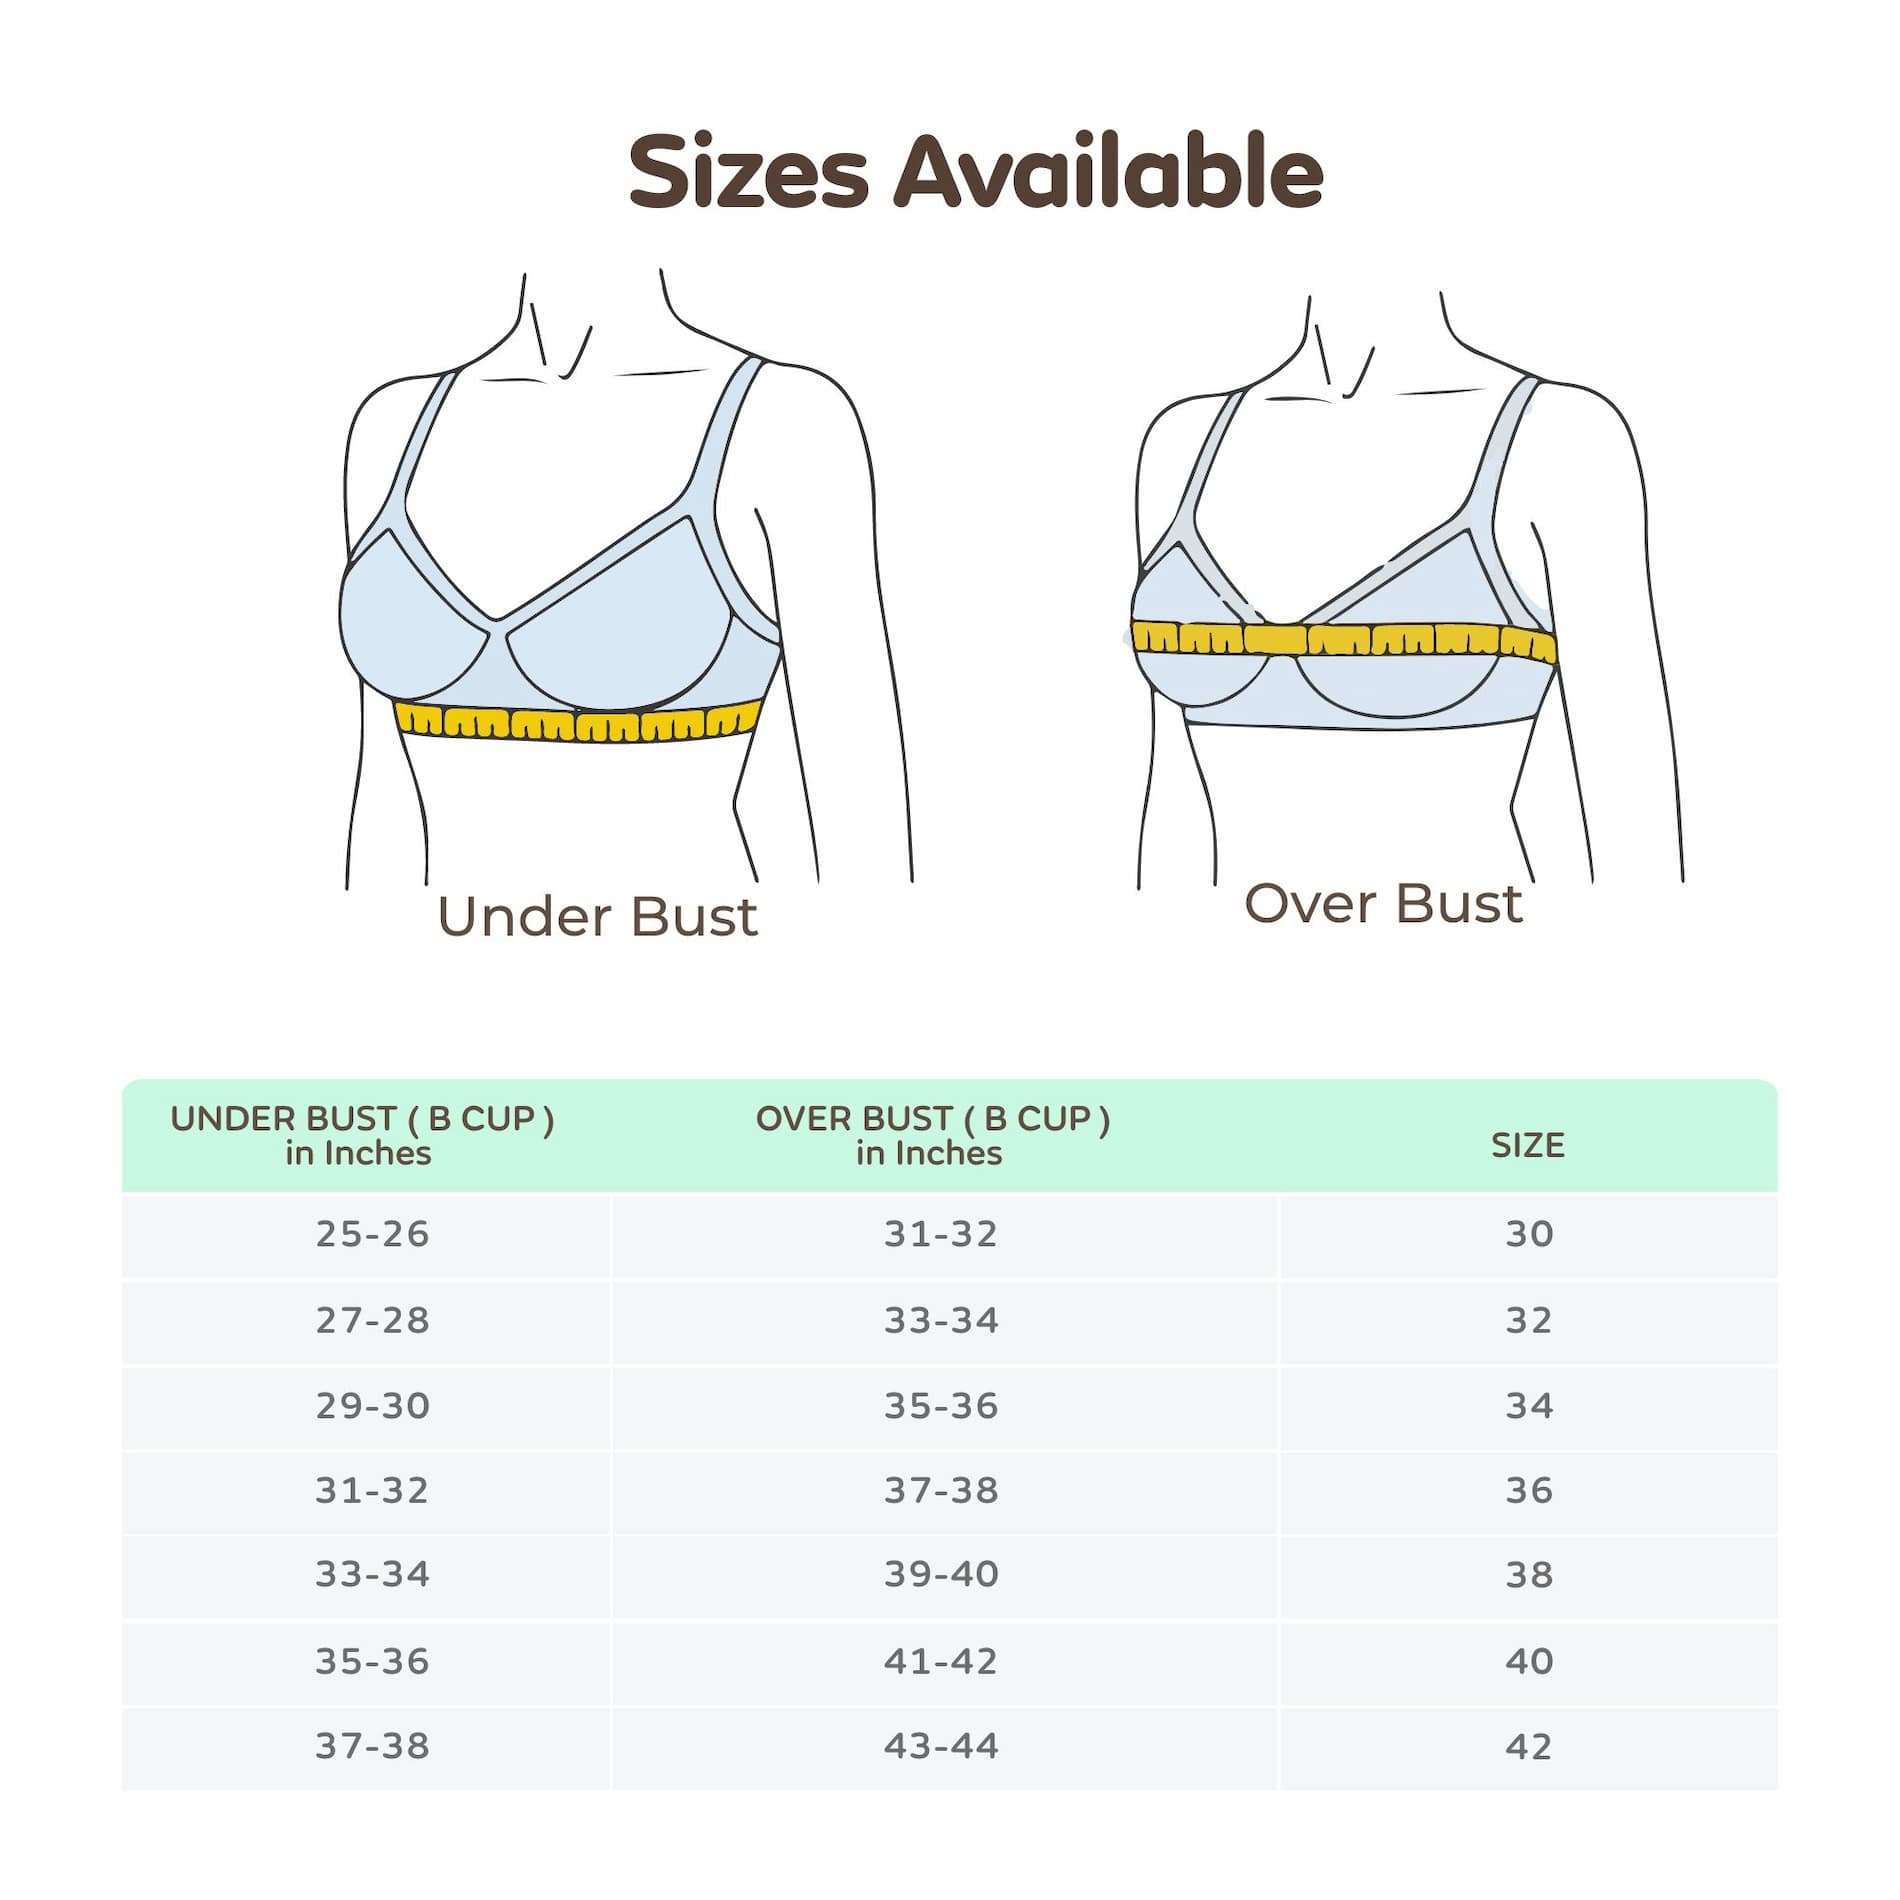 Maternity/Nursing Bras Non-Wired, Non-Padded with free Bra Extender - Persian Blue 36 B 